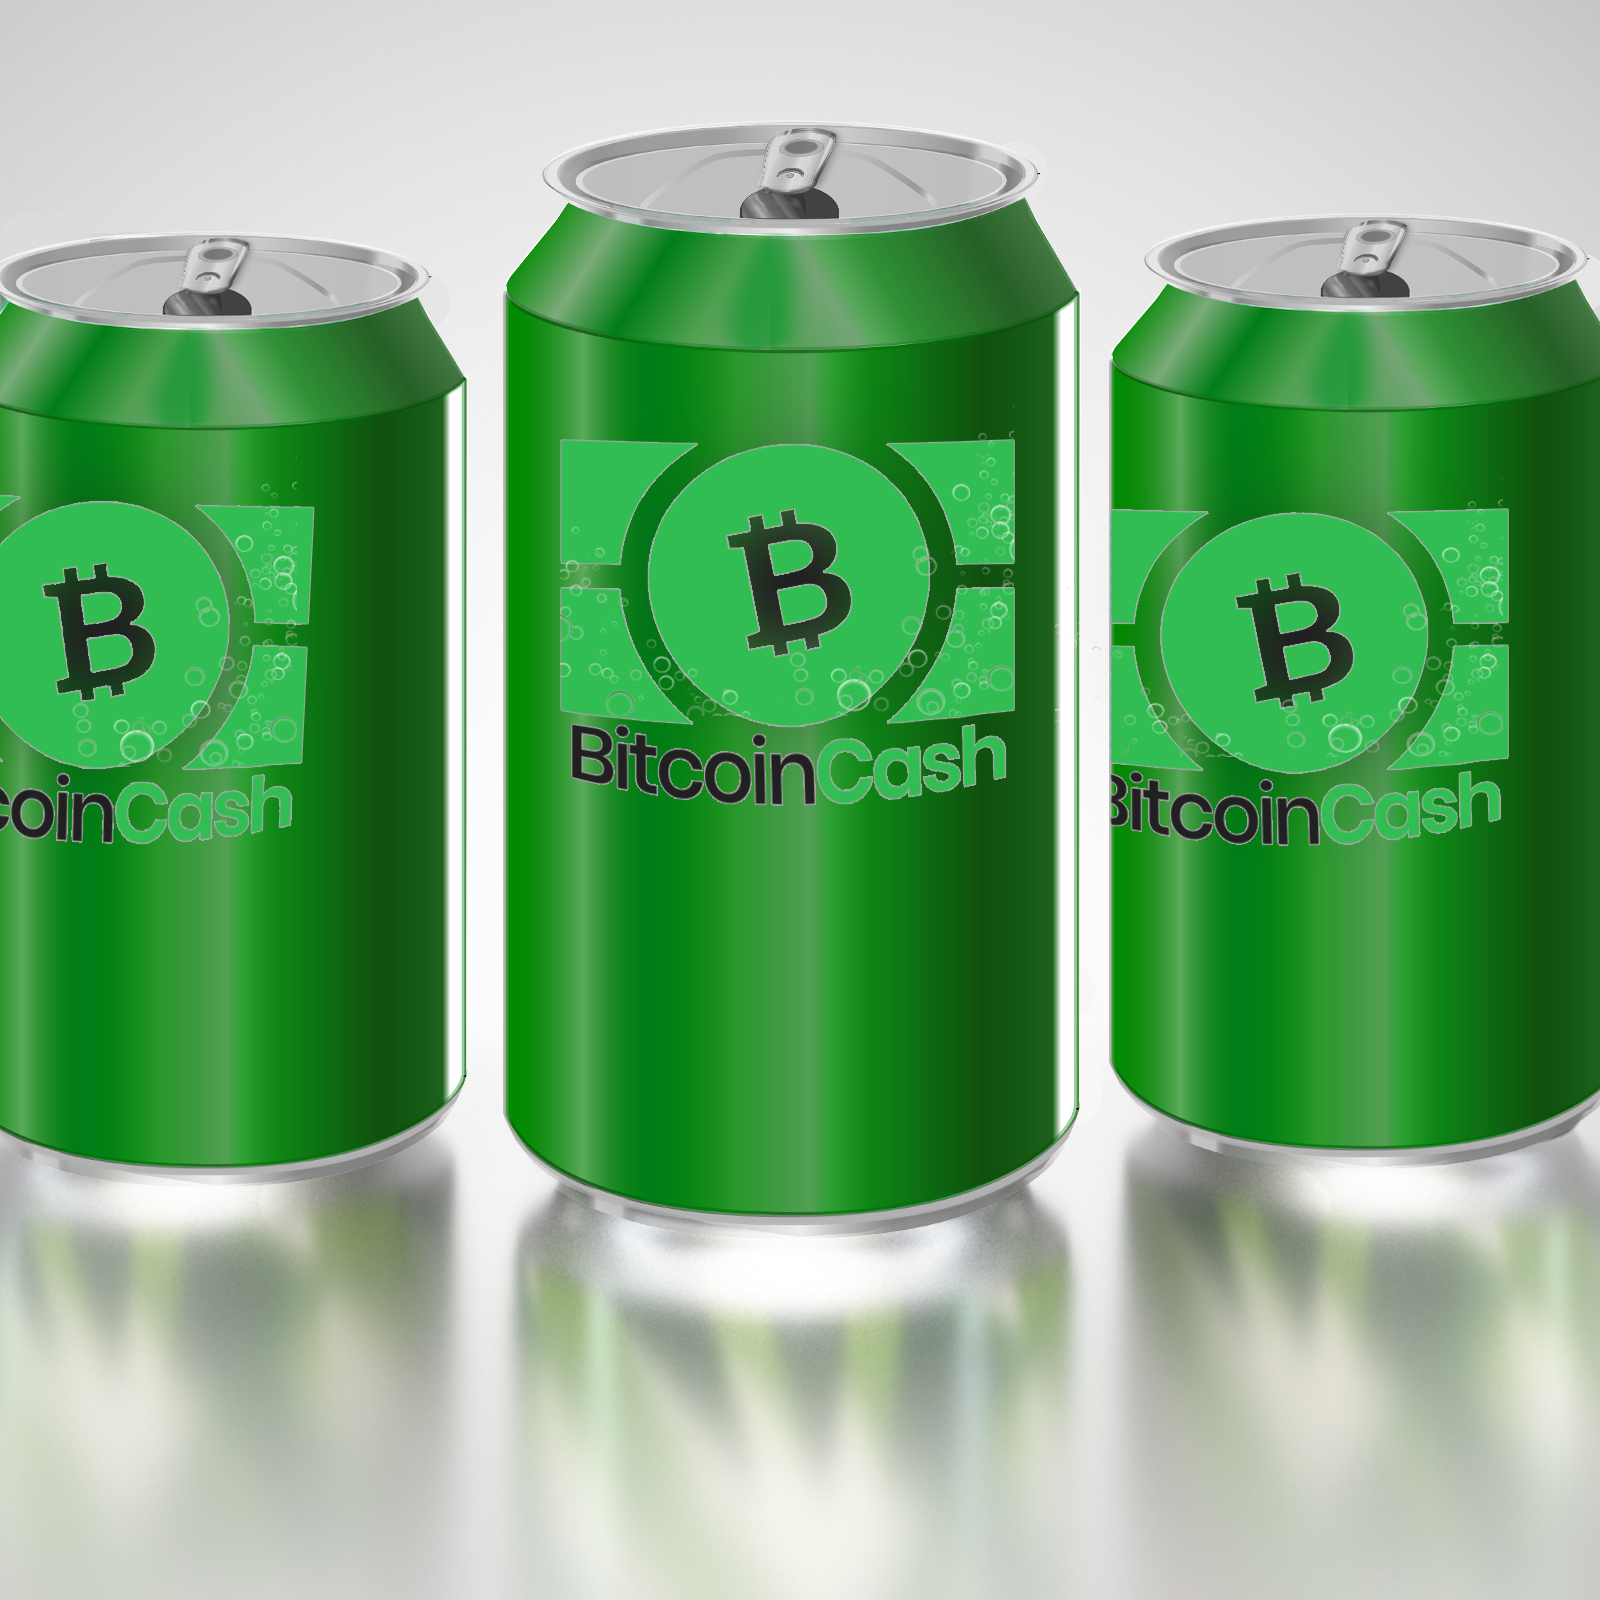 Bitcoin Cash Supporters Prepare for the Network's Next Six Months